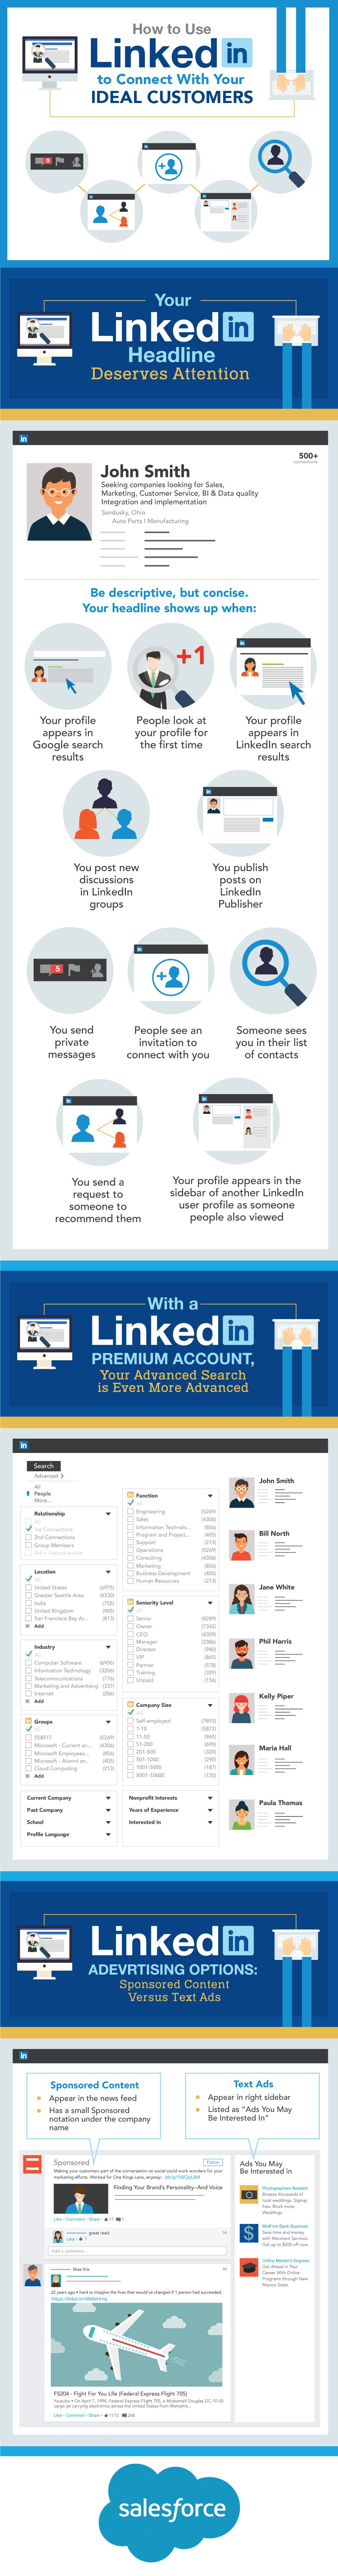 How to Use LinkedIn to Connect With Your Ideal Customers